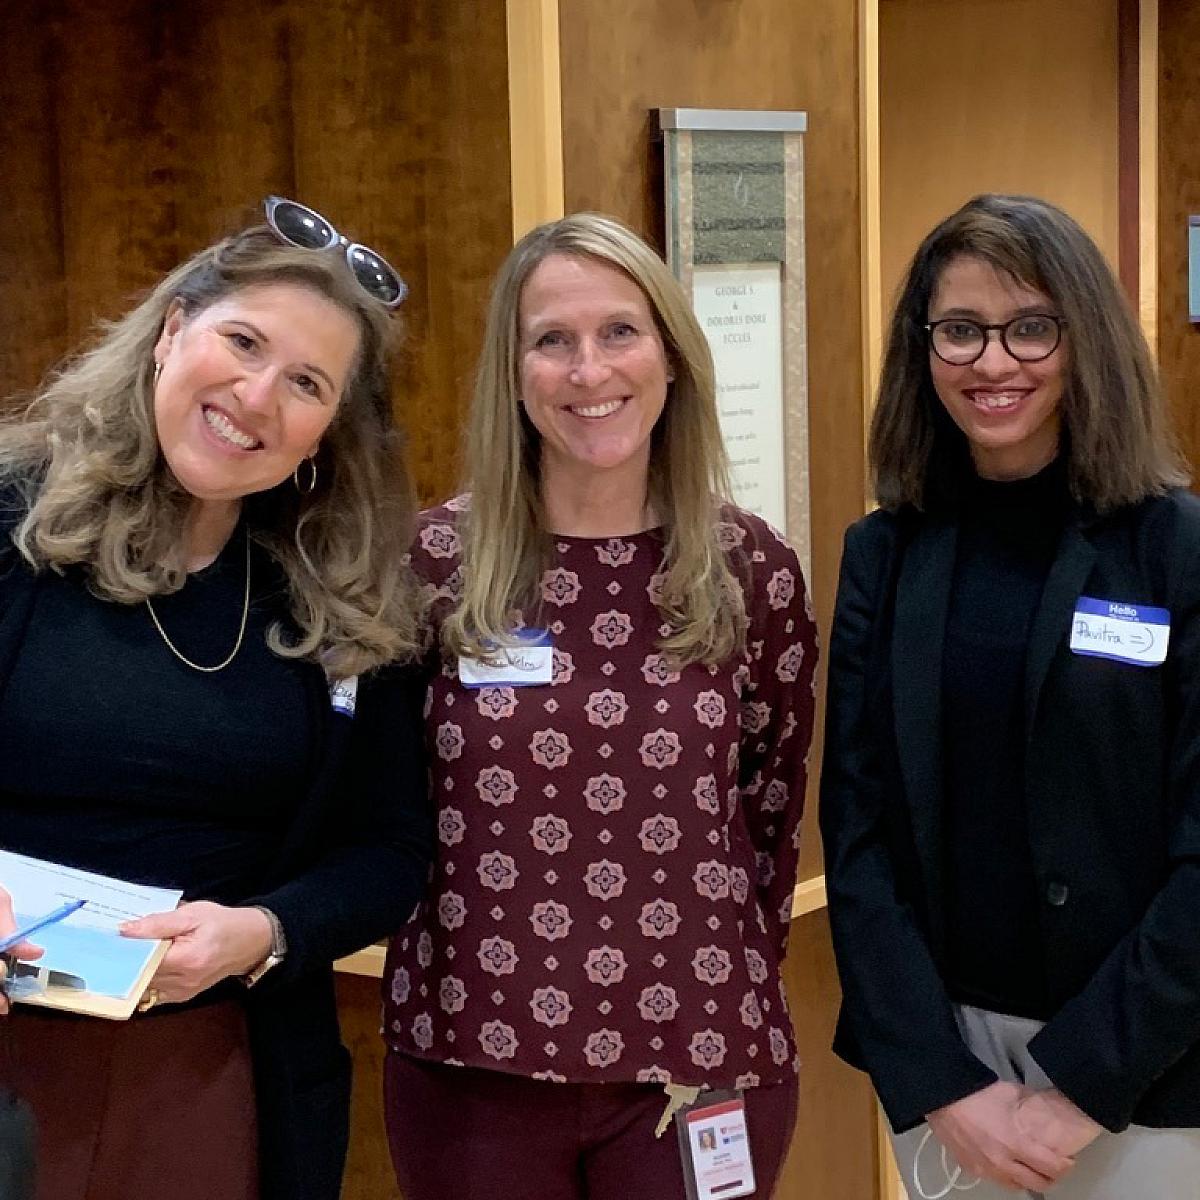 Advocate Rebecca Cressman joins Dr. Alana Welm and Project Next Symposium presenter Pavitra Viswanath at the symposium's poster session. Pavitra Viswanath is graduate student in the A. Welm Lab.